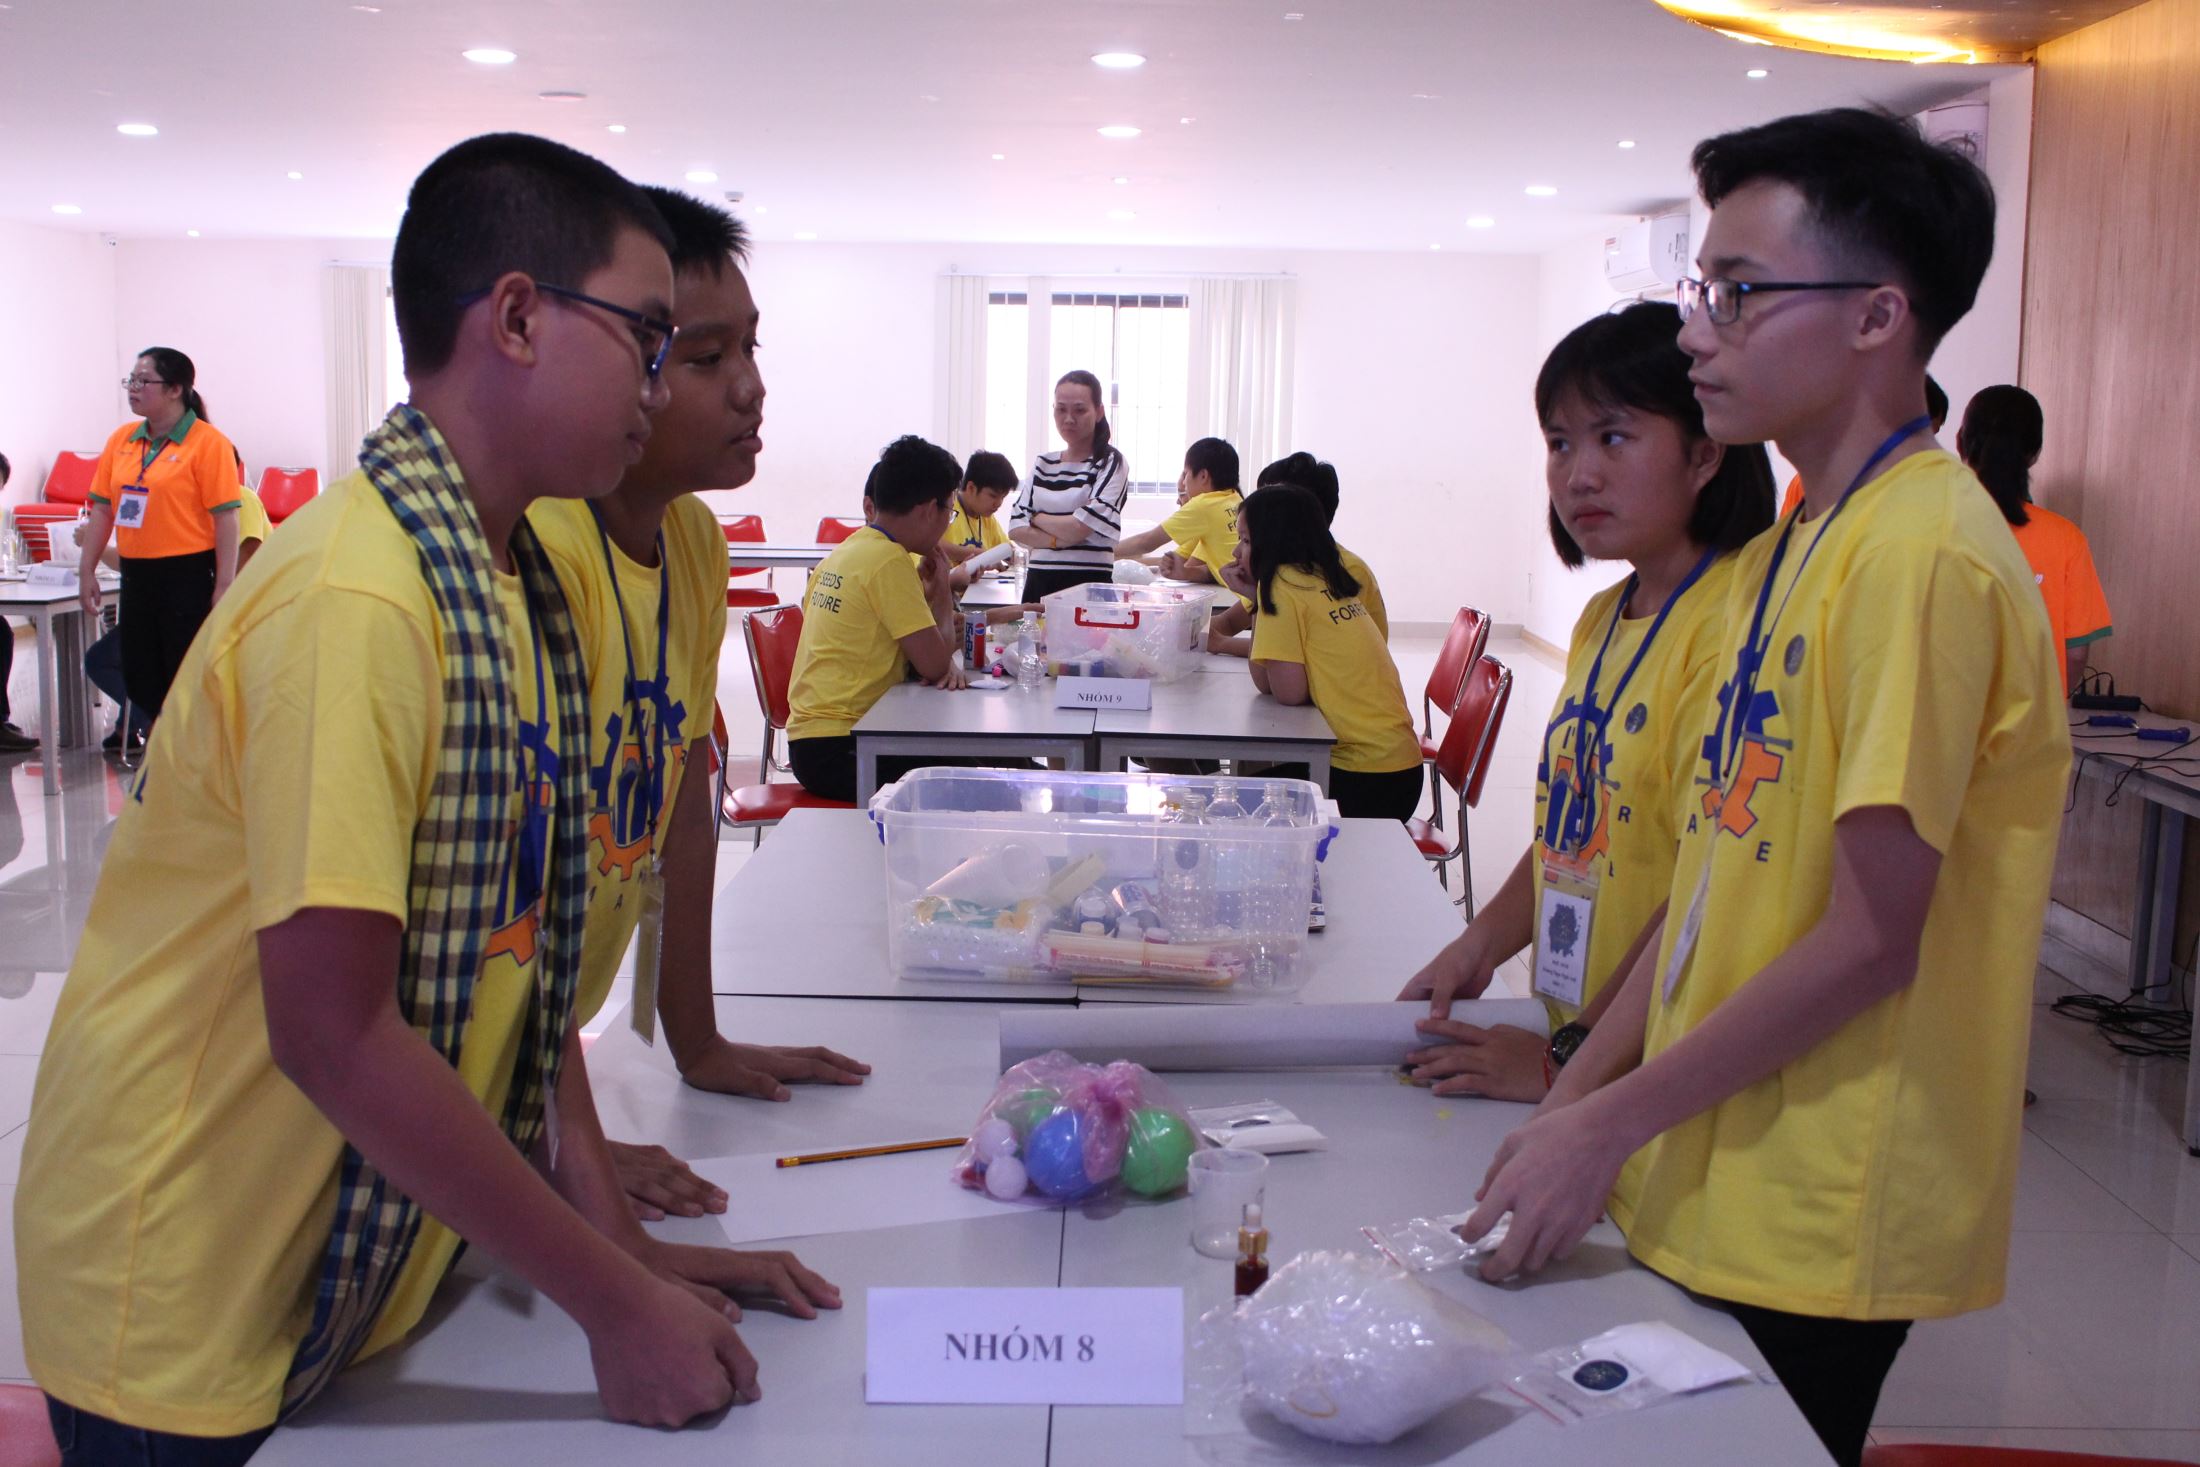 Tom Phi Trung Viet – grade 9 (right) discussed with team who was randomly assigned in the 2nd round – Maker Day of STEM Ambassadors program.